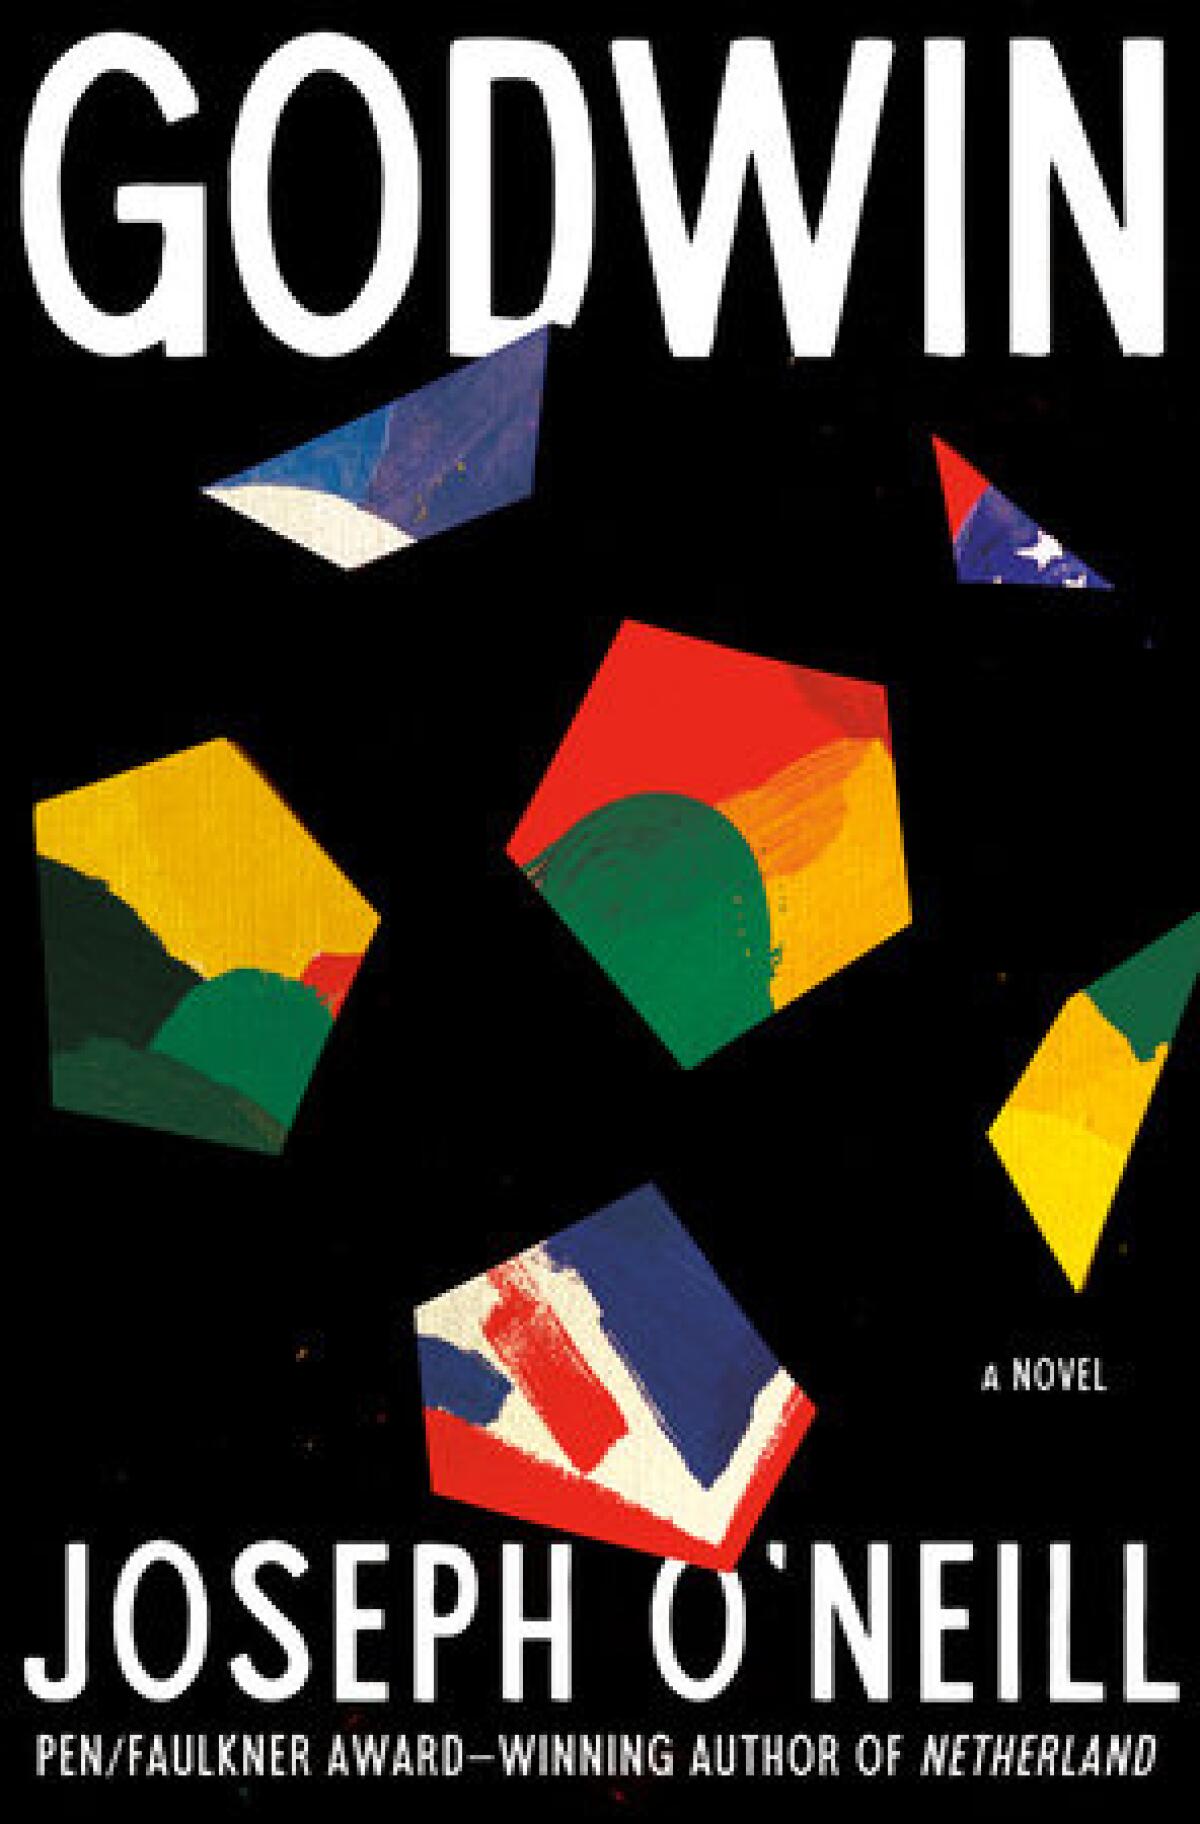 Cover from "Godwin"